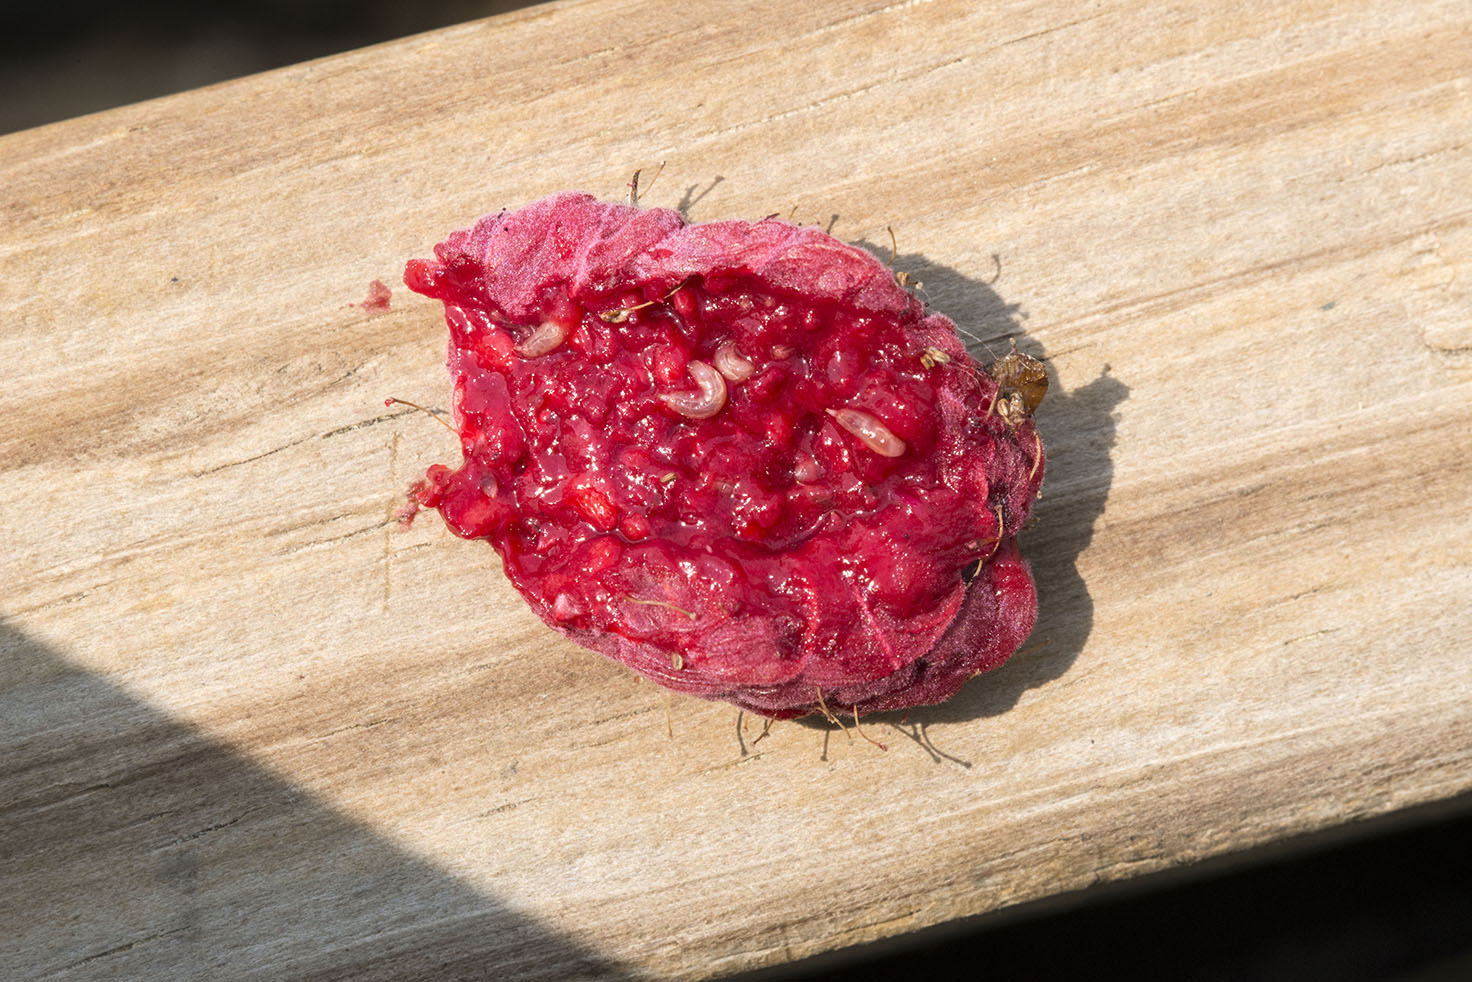 Spotted Wing Drosophila larvae in infested raspberry